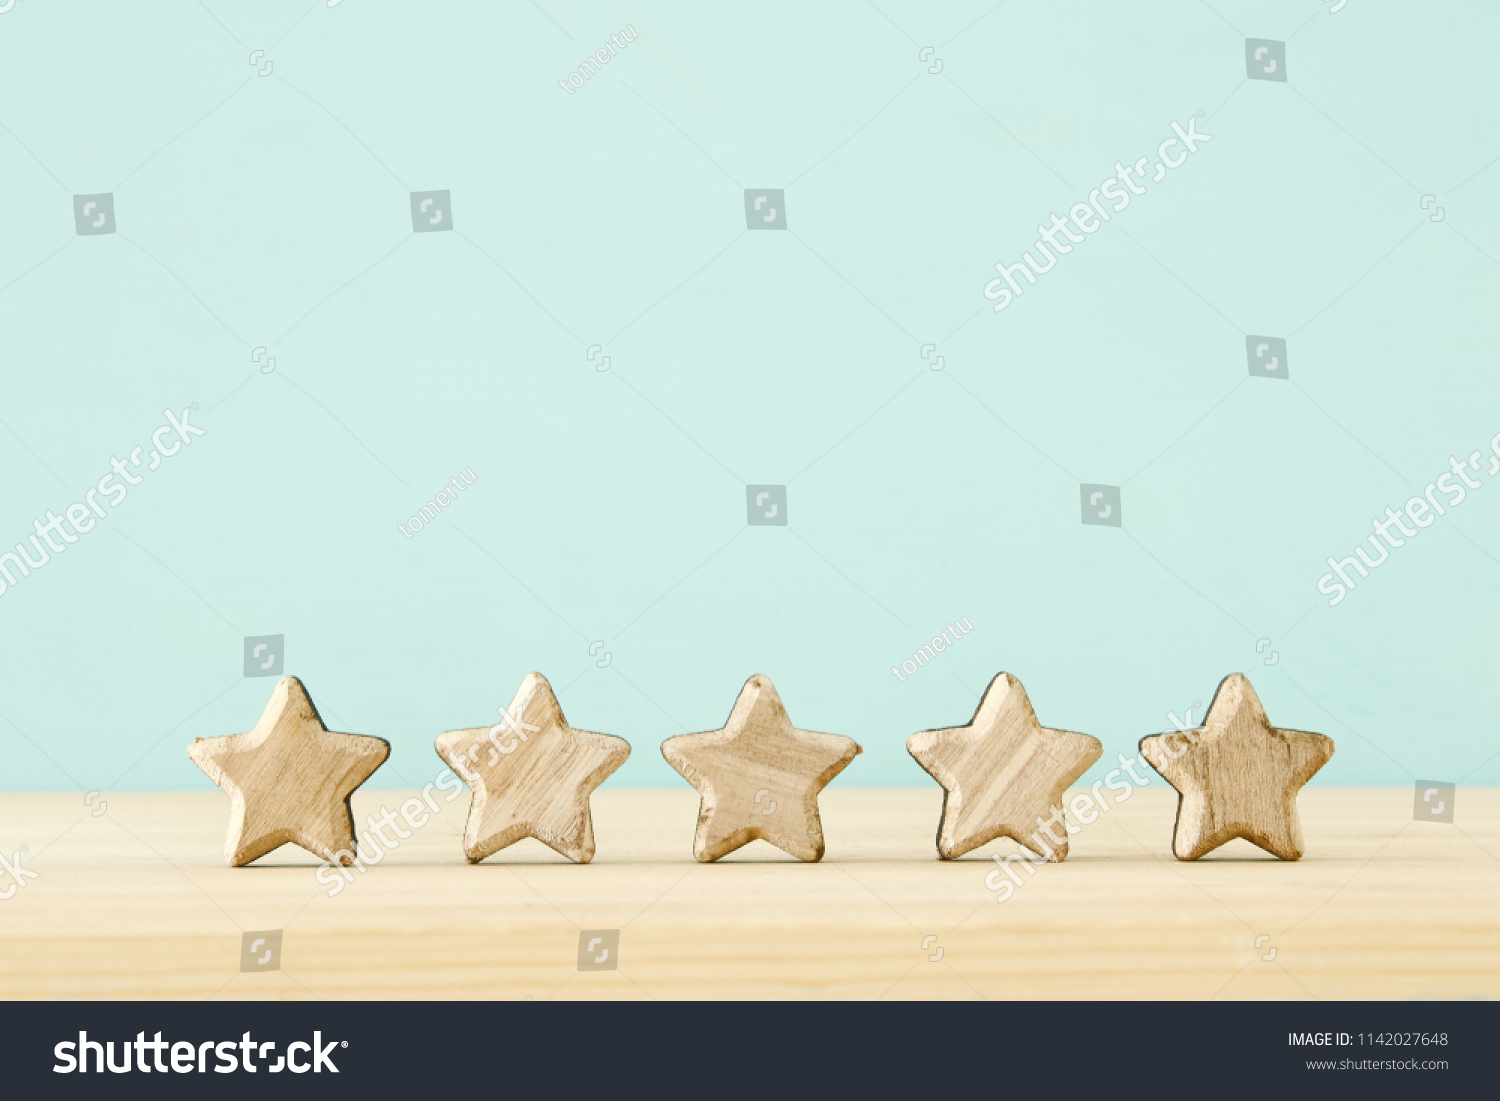 concept image of setting a five star goal. increase rating or ranking, evaluation and classification idea #1142027648